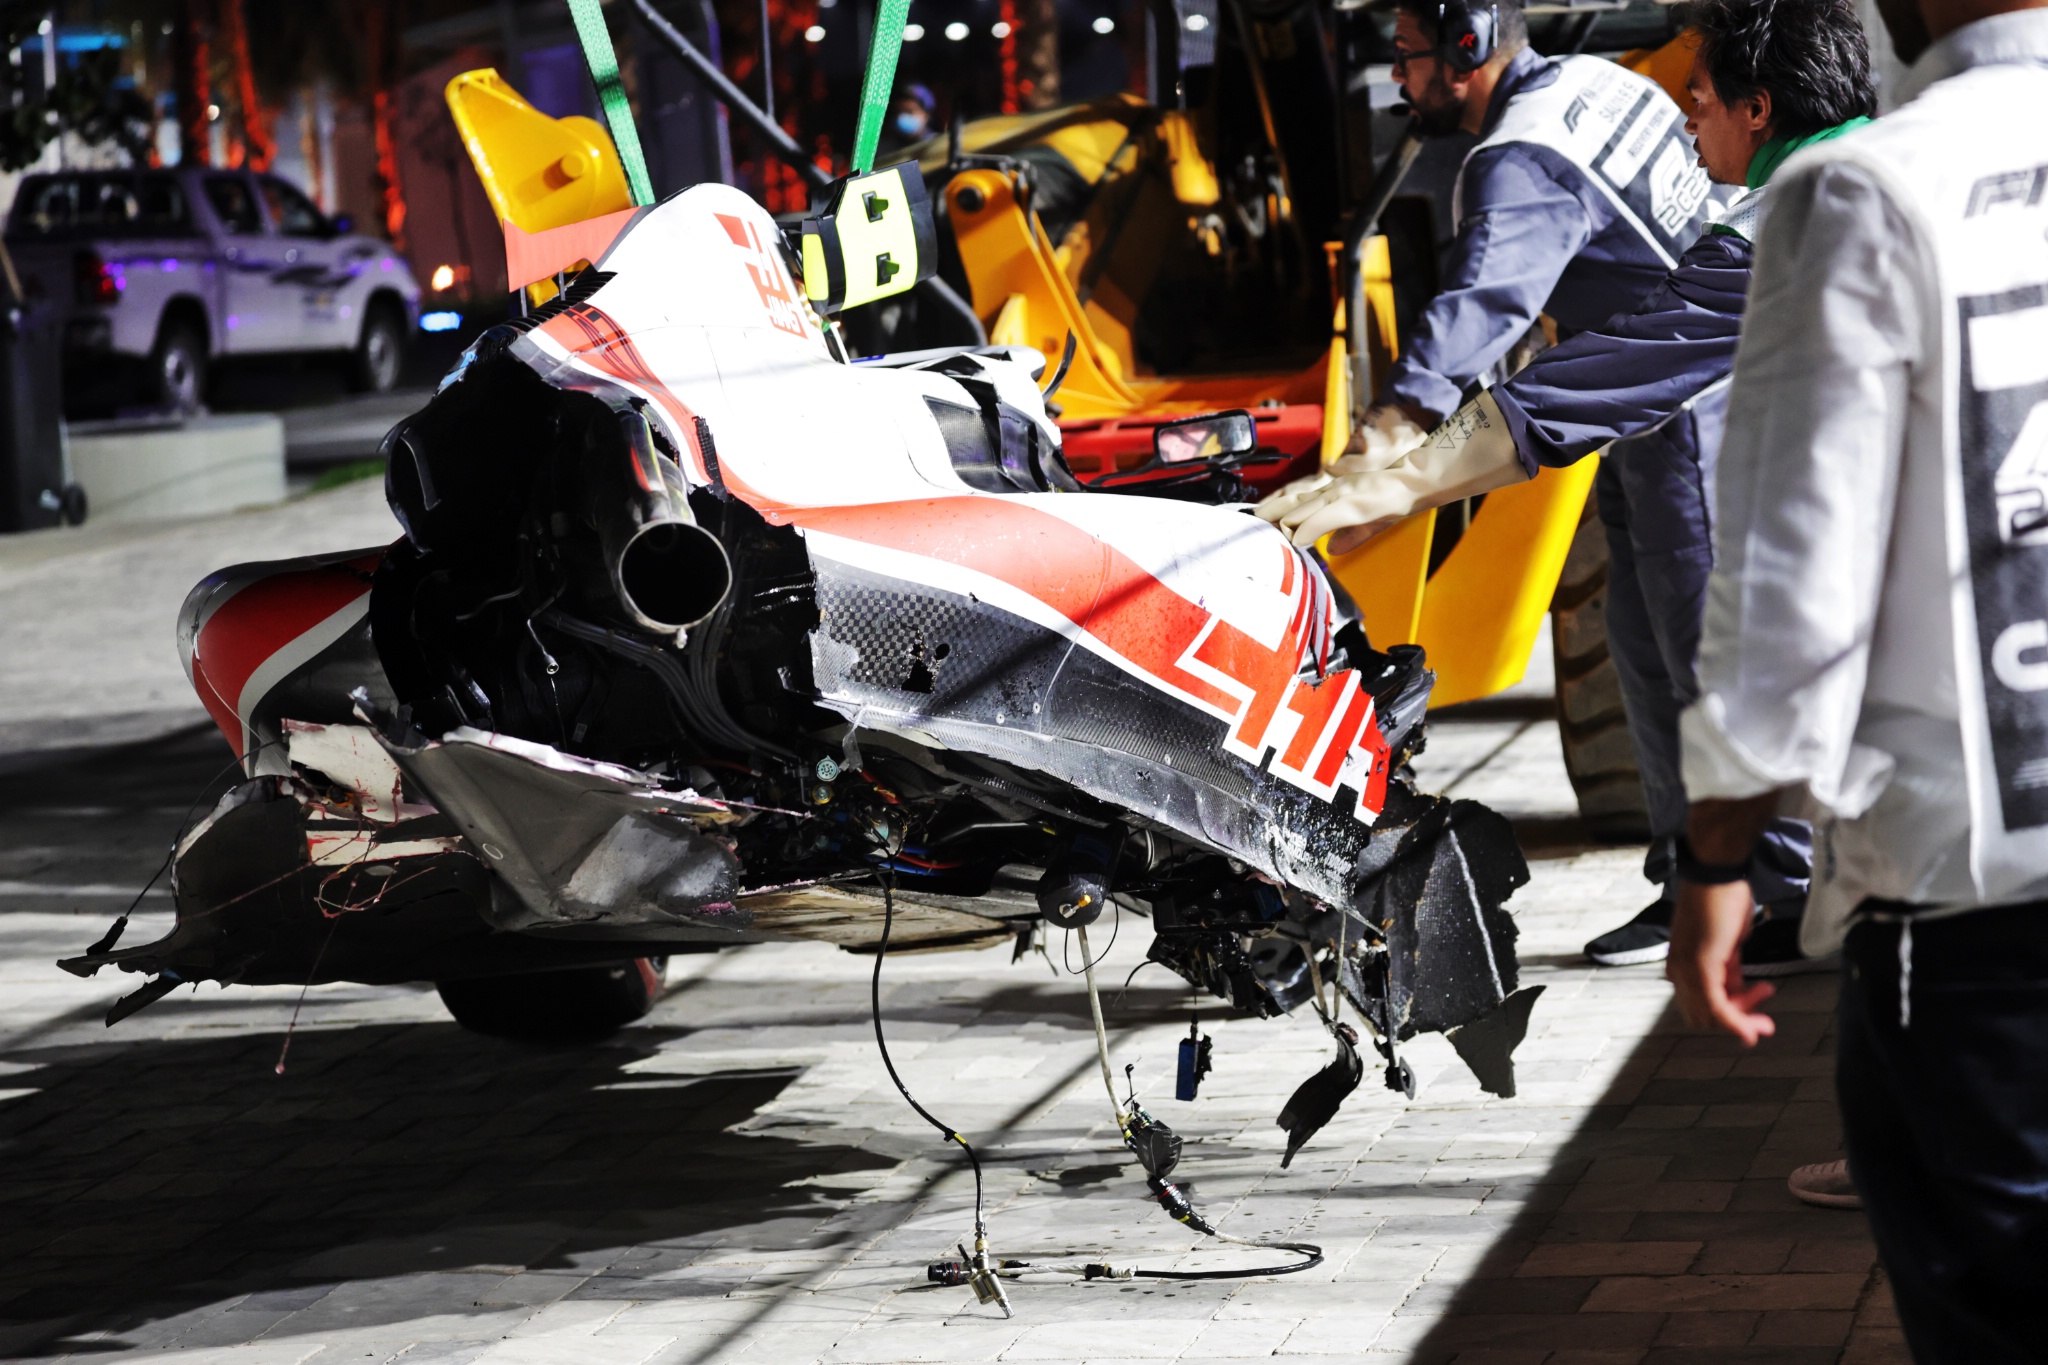 The damaged Haas VF-22 of Mick Schumacher (GER) Haas F1 Team is removed from the circuit after he crashed during qualifying.